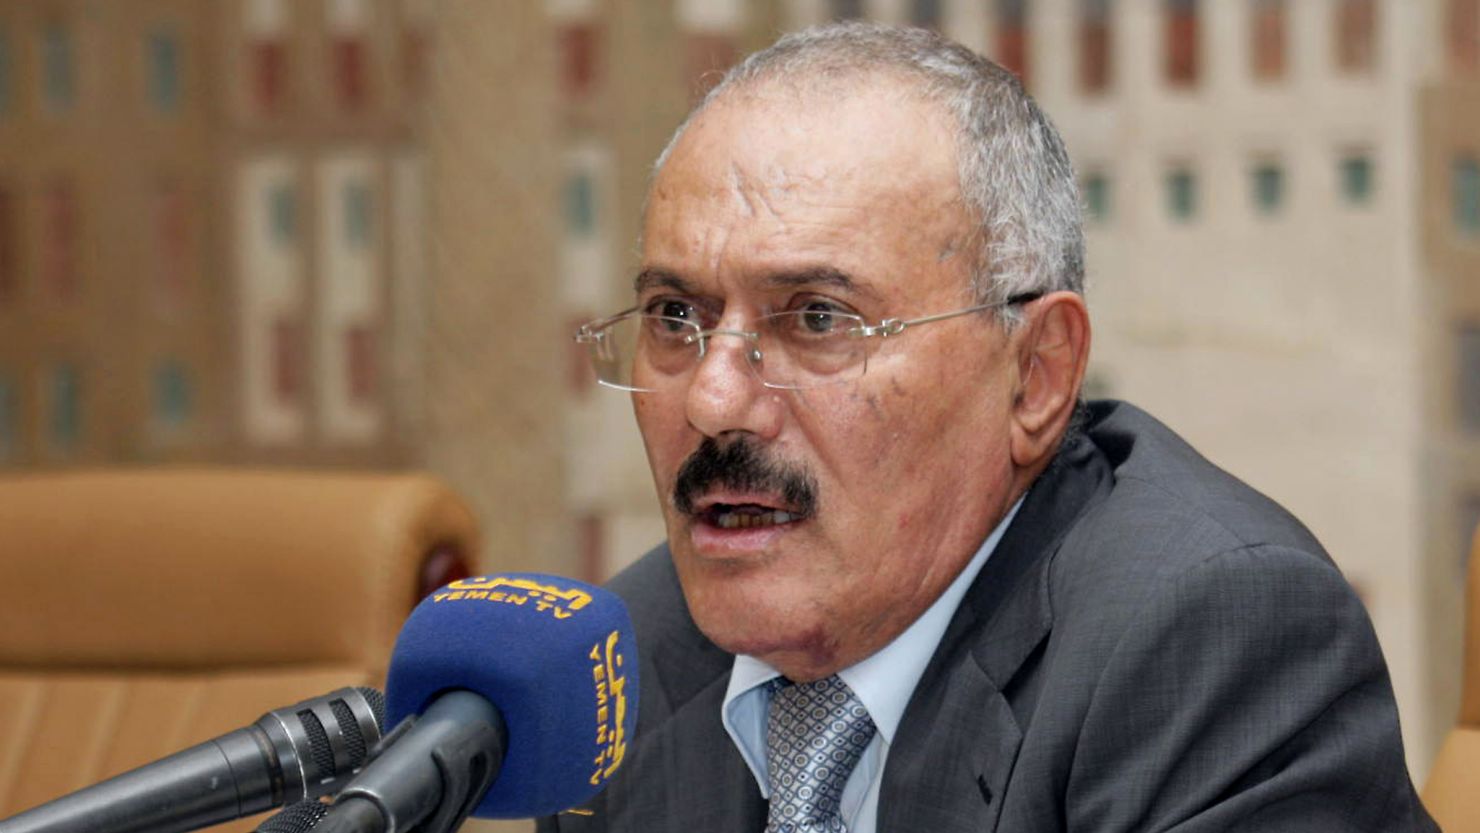 In return for immunity, Yemeni President  Ali Abdullah Saleh will step down next month after more than 33 years in power.